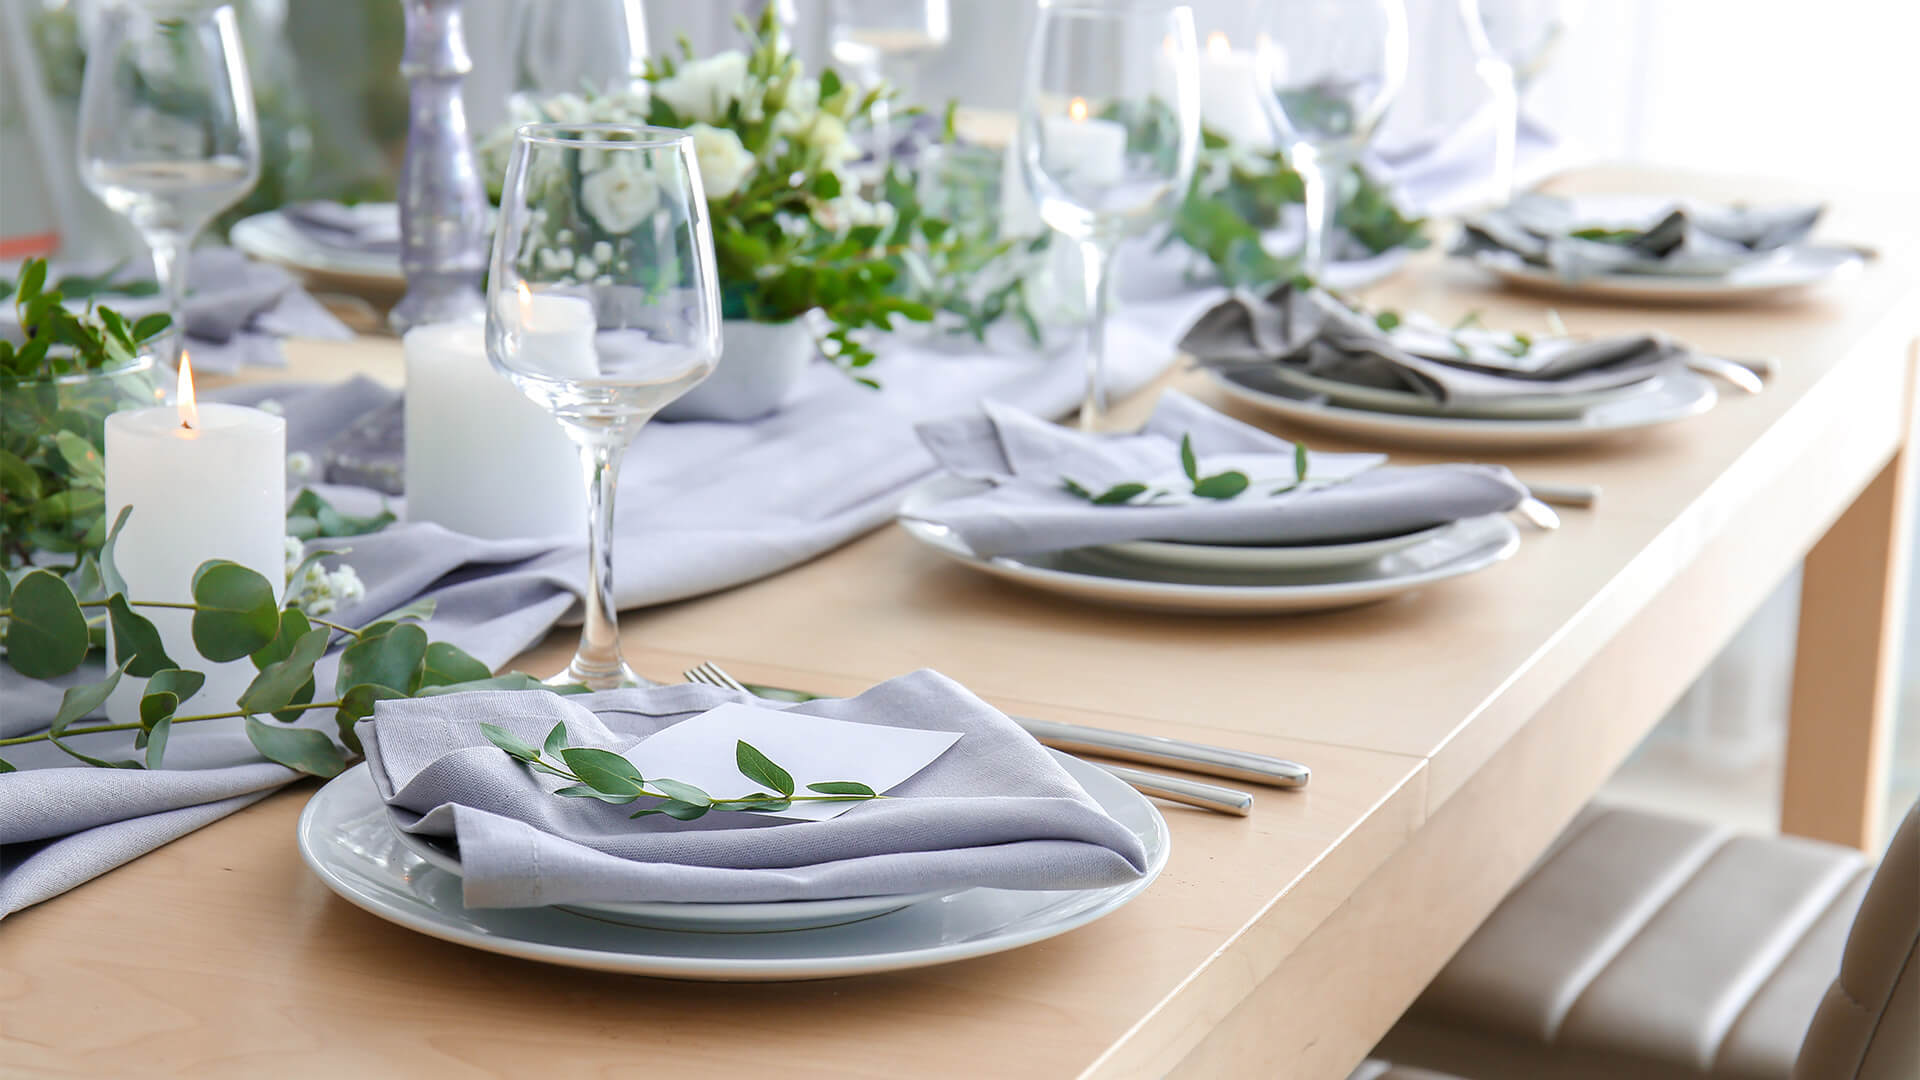 Wedding table setting with light blue decorations and green leaves